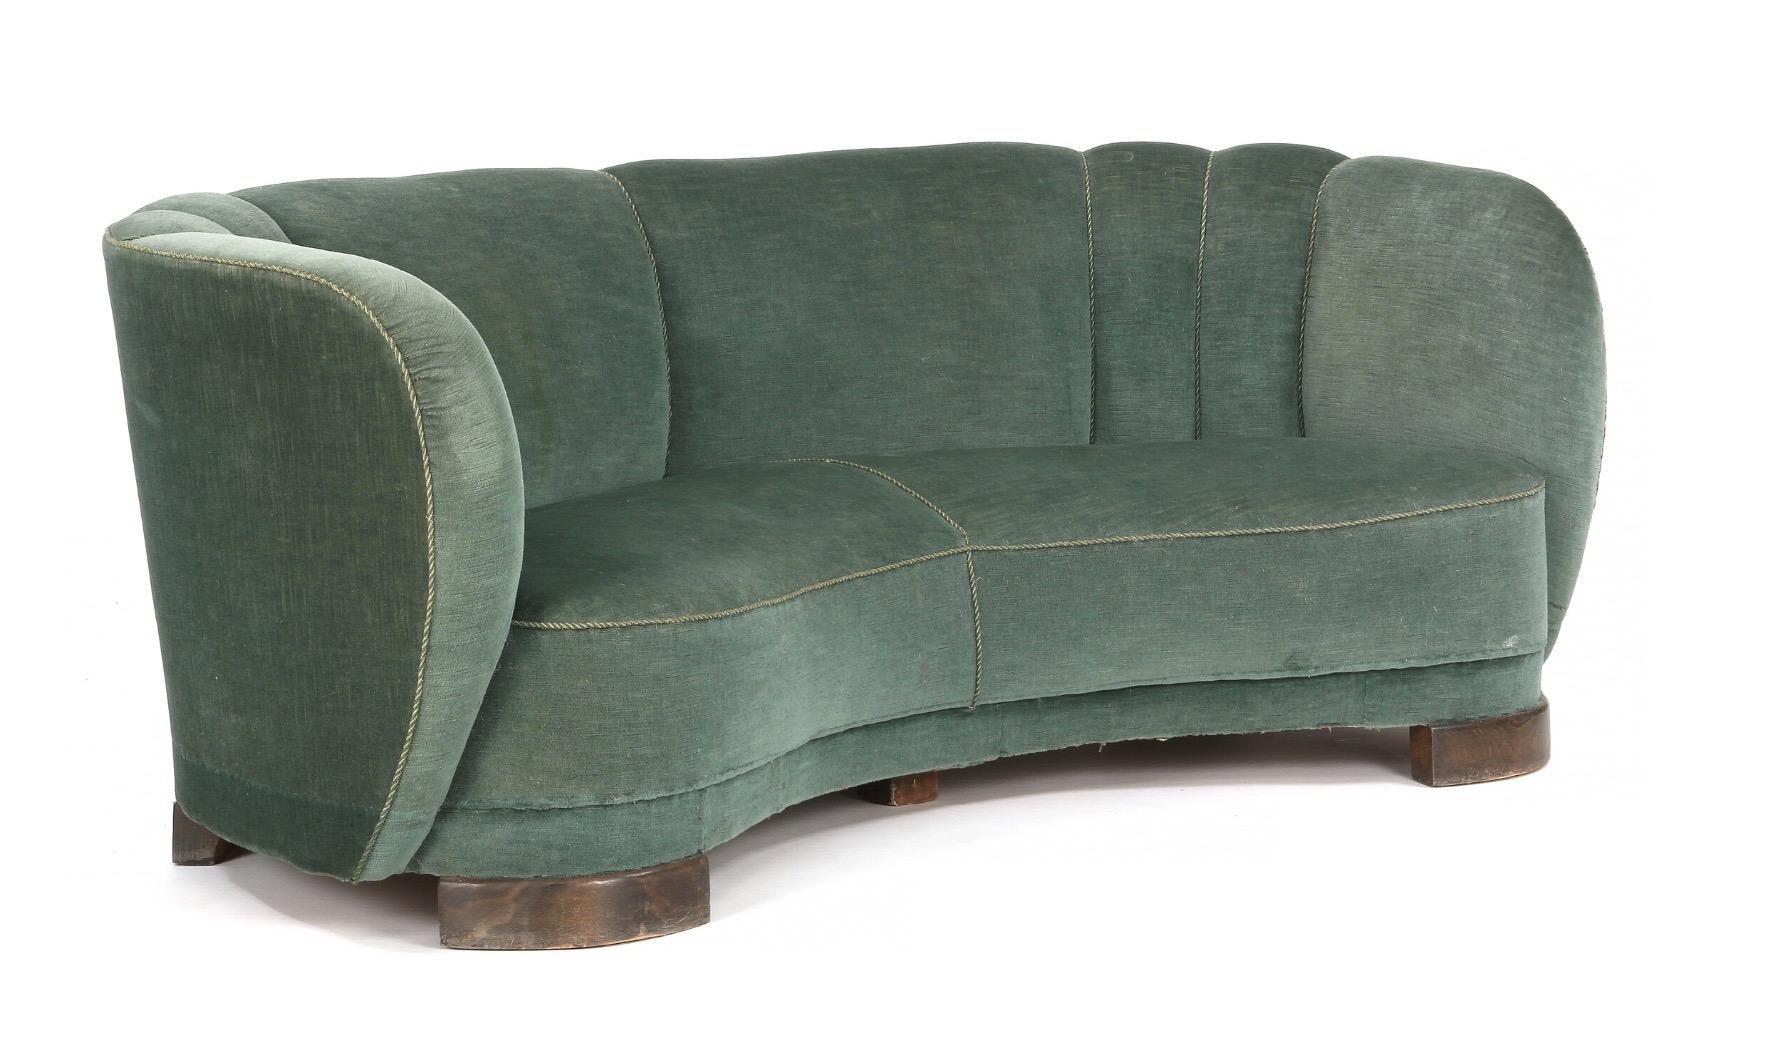 Banana shaped curved sofa in the style of Viggo Boesen and Fritz Hansen, made in Denmark, 1940s. Some wear to green velvet fabric.

 